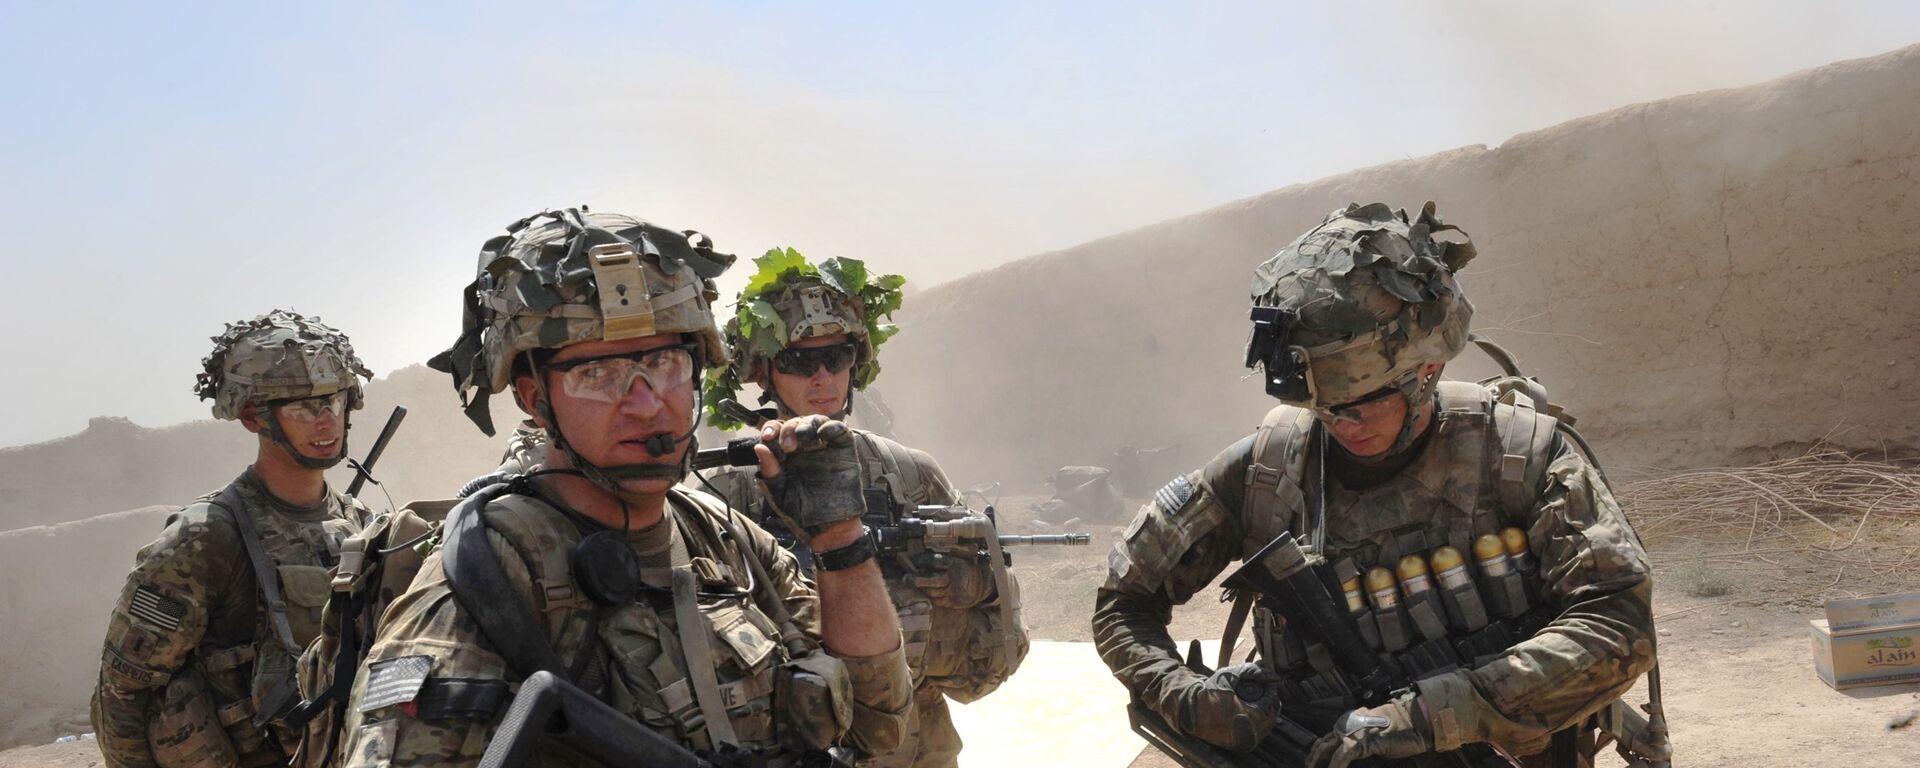 In this photo taken on 5 August 2011, US troops from the Charlie Company, 2-87 Infantry, 3d Brigade Combat Team under Afghanistan's International Security Assistance Force patrols Kandalay village following Taliban attacks on a joint US and Afghan National Army checkpoint protecting the western area of Kandalay village. - Sputnik International, 1920, 15.04.2021